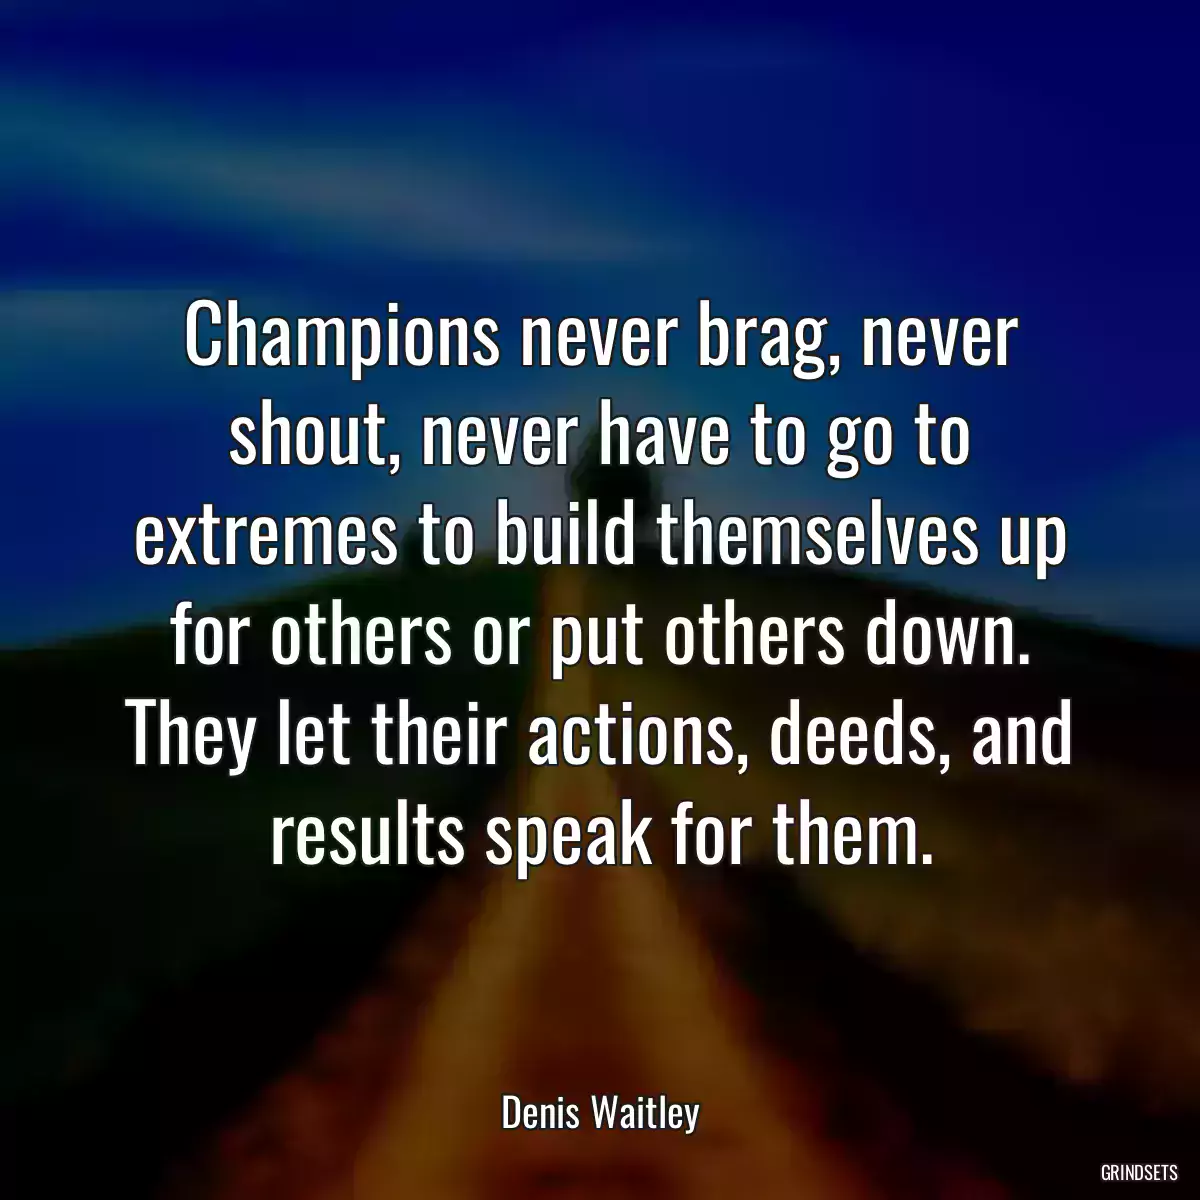 Champions never brag, never shout, never have to go to extremes to build themselves up for others or put others down. They let their actions, deeds, and results speak for them.